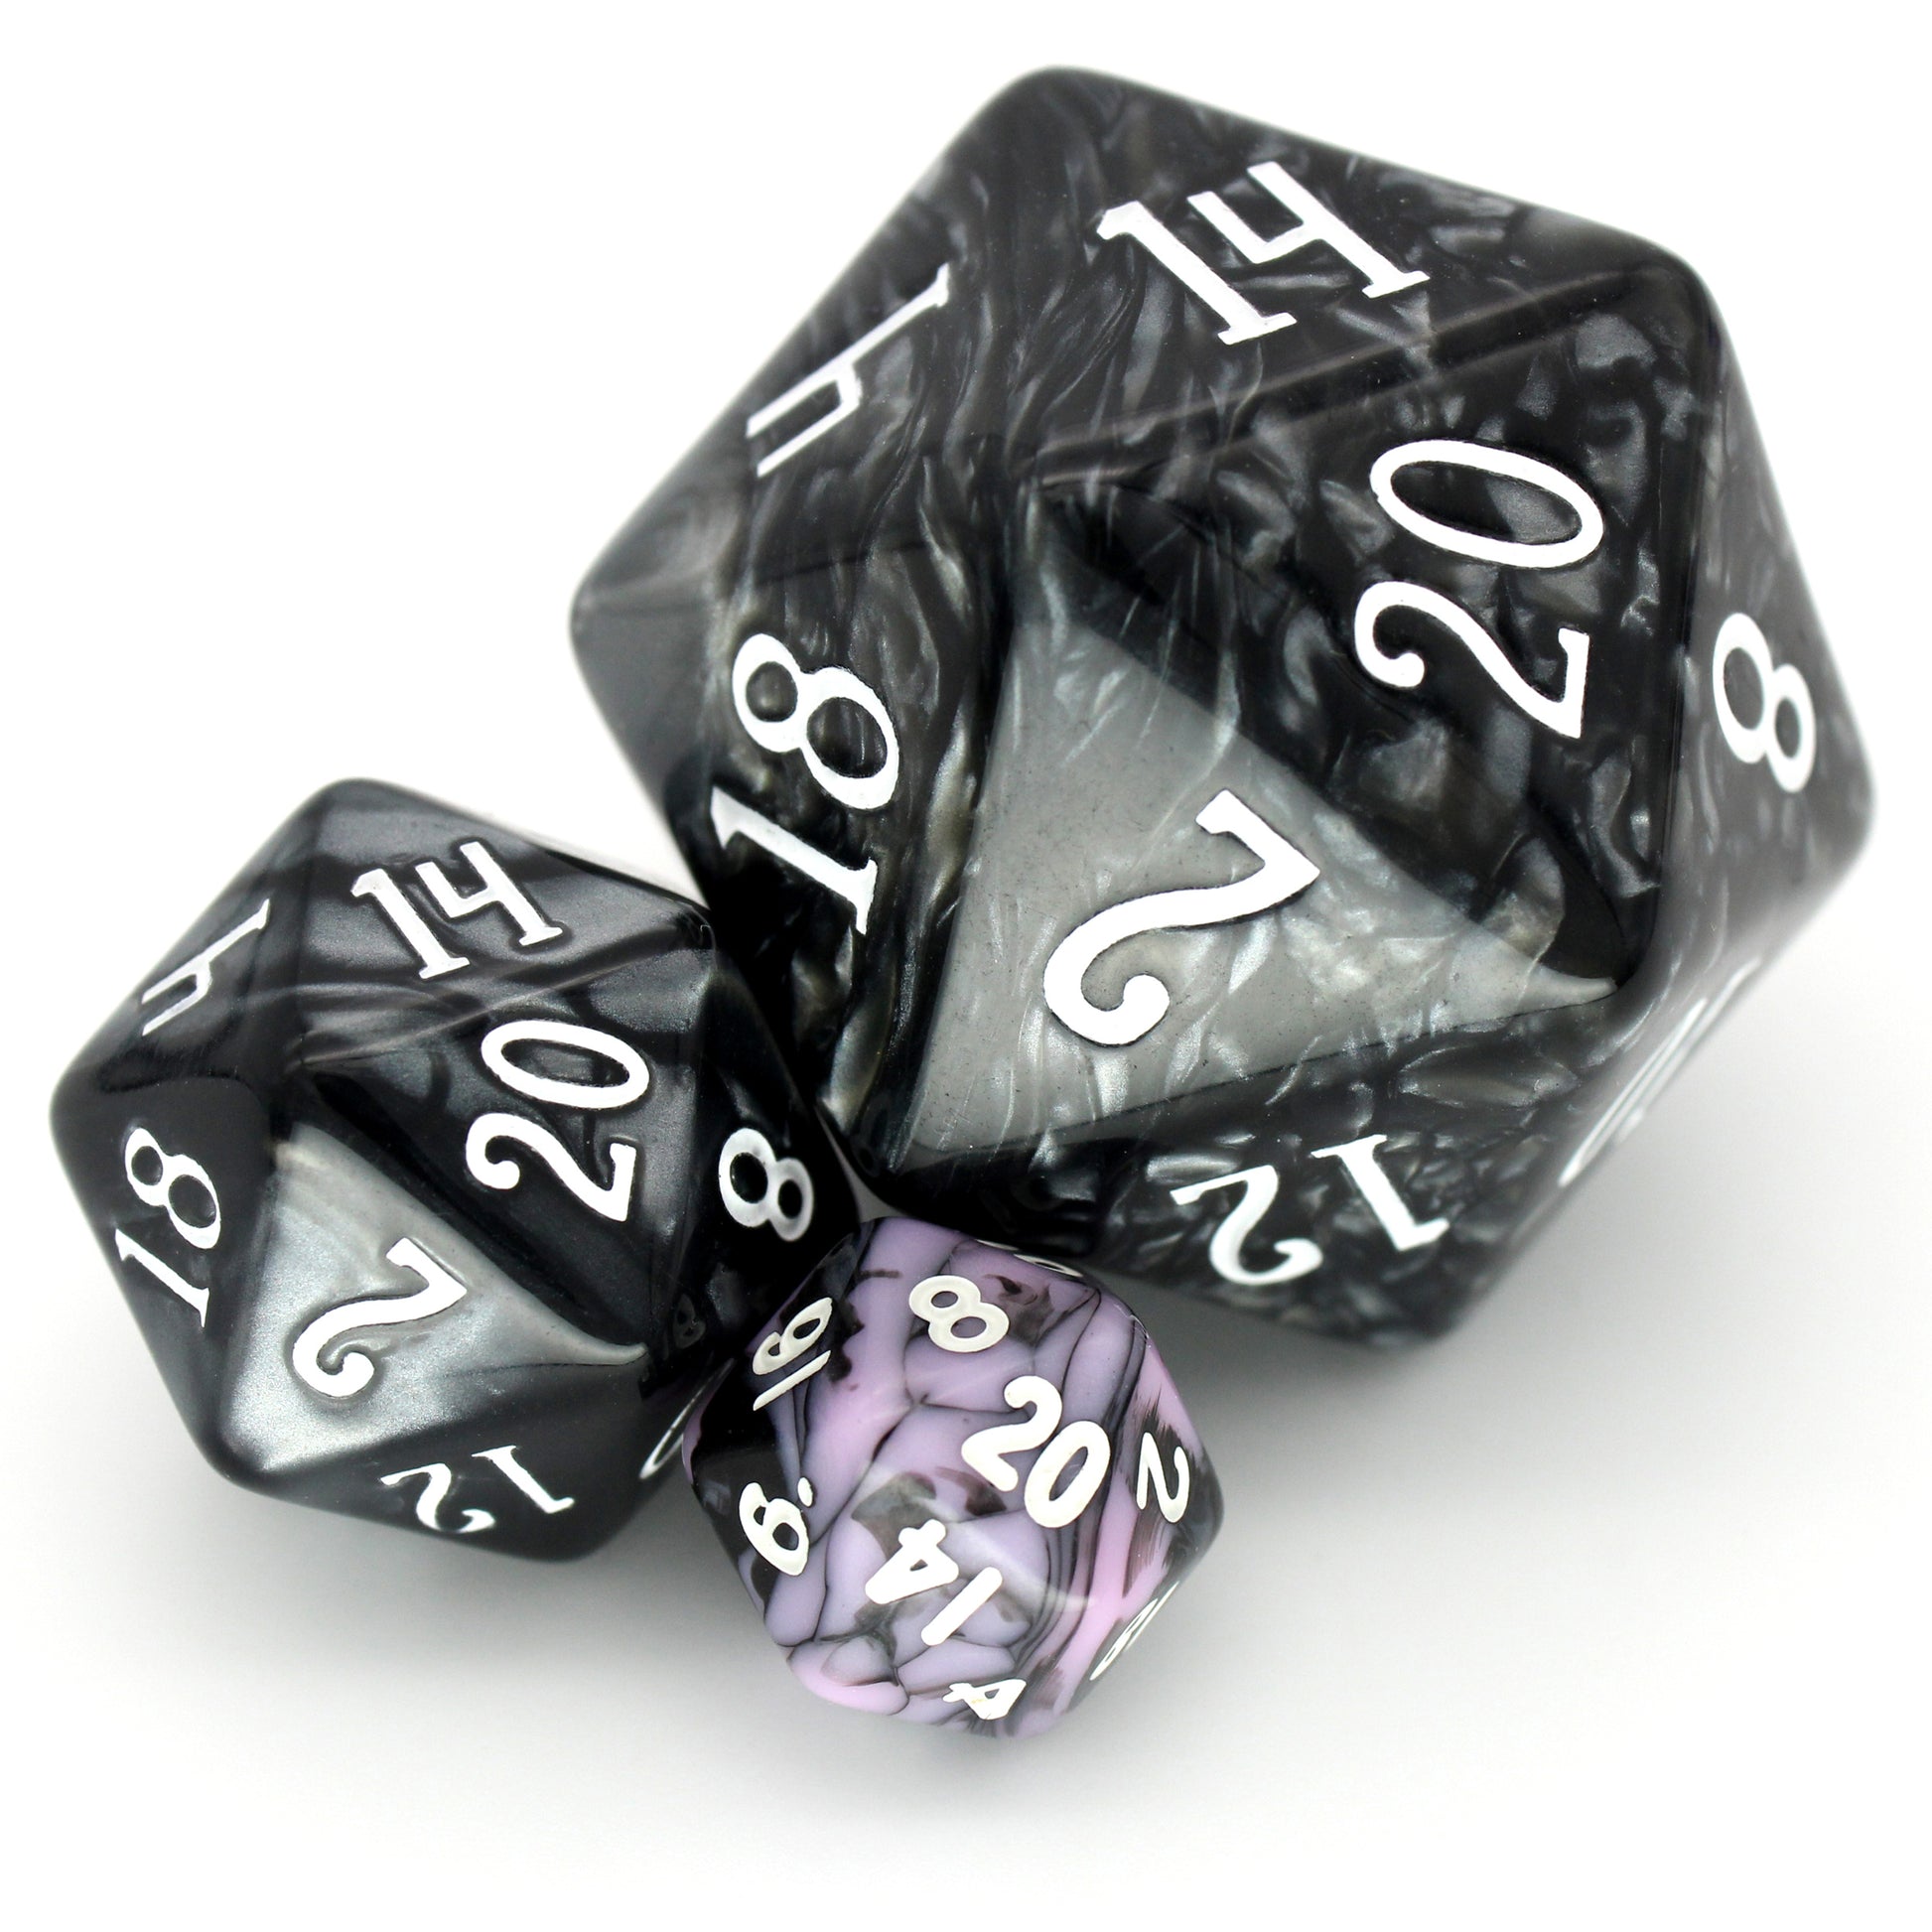 D'vas is a 7-piece 13mm resin dice set with swirls of black and pink, inked in white. It belongs to our tiny but mighty Wee Lads collection.